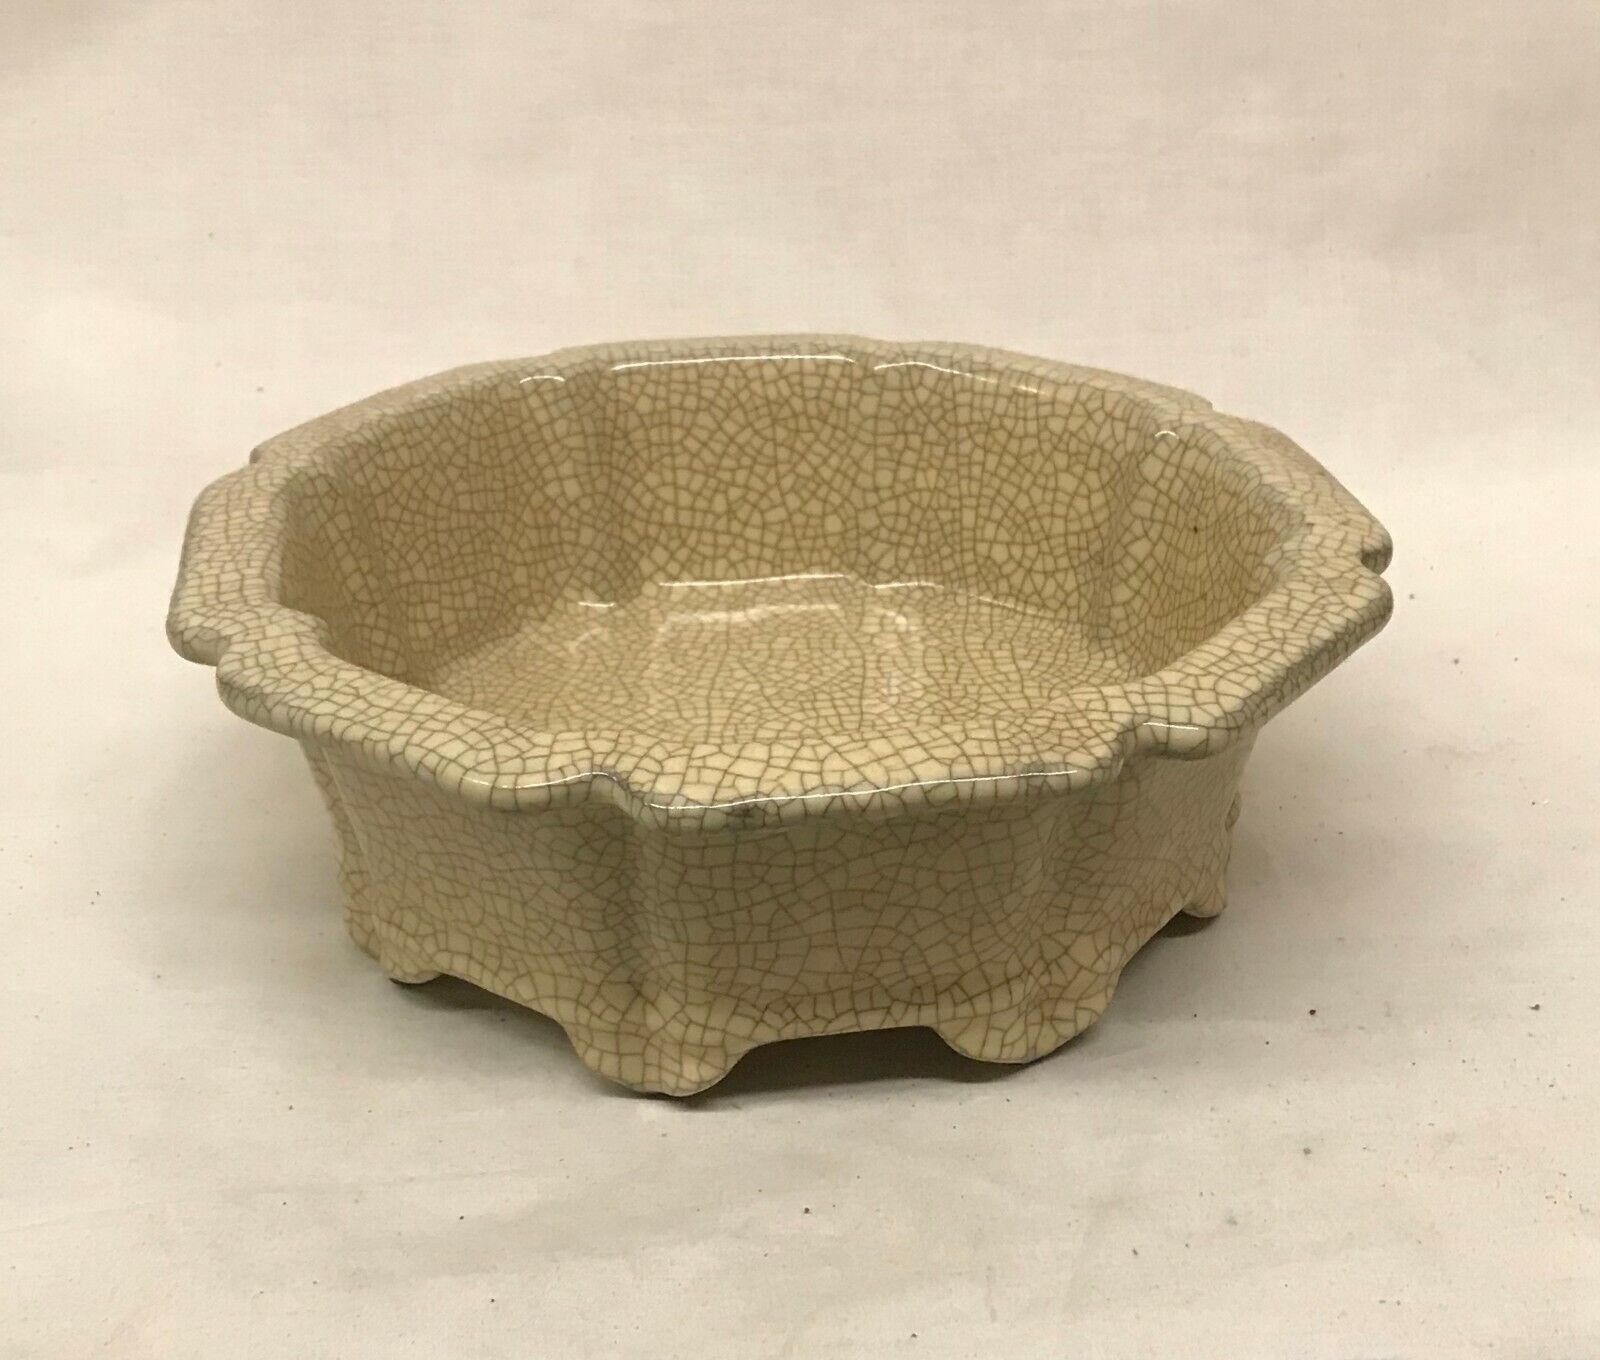 Crackled glaze with OFFicial Milwaukee Mall site mark. Geyao. Song Most Probably Period.